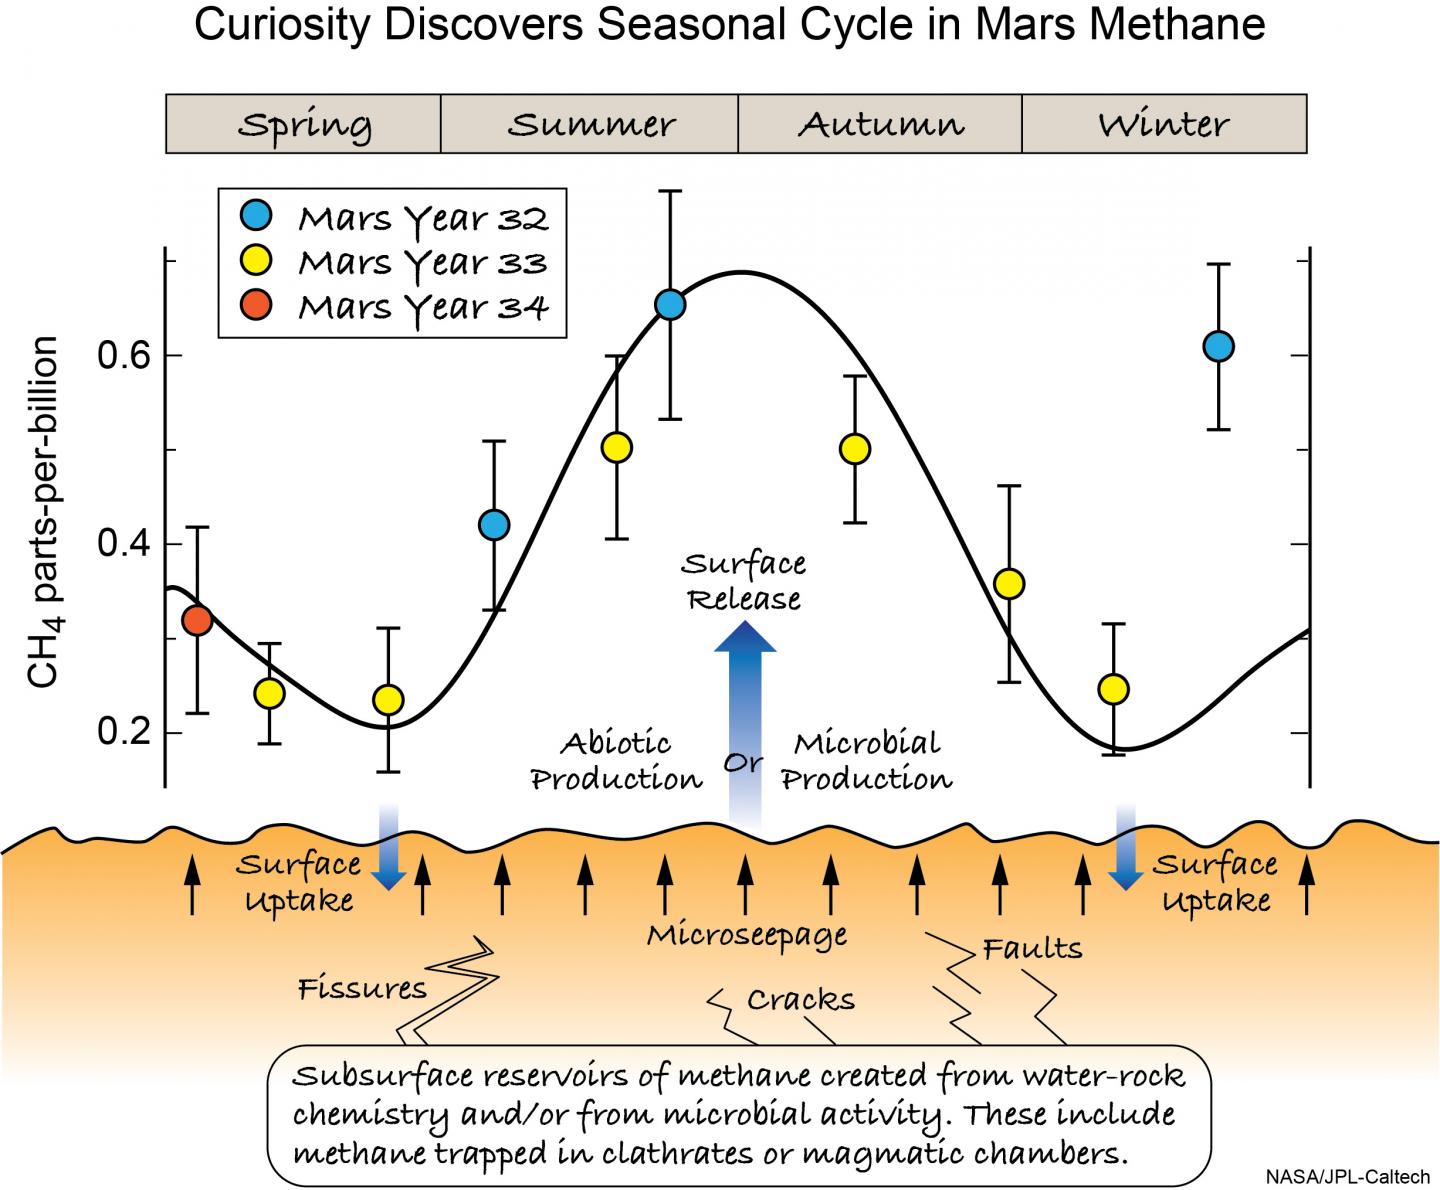 Mars Exhumes Methane on Seasonal Cycle, Curiosity Reveals; Rover Also Detects Ancient Organic Matter